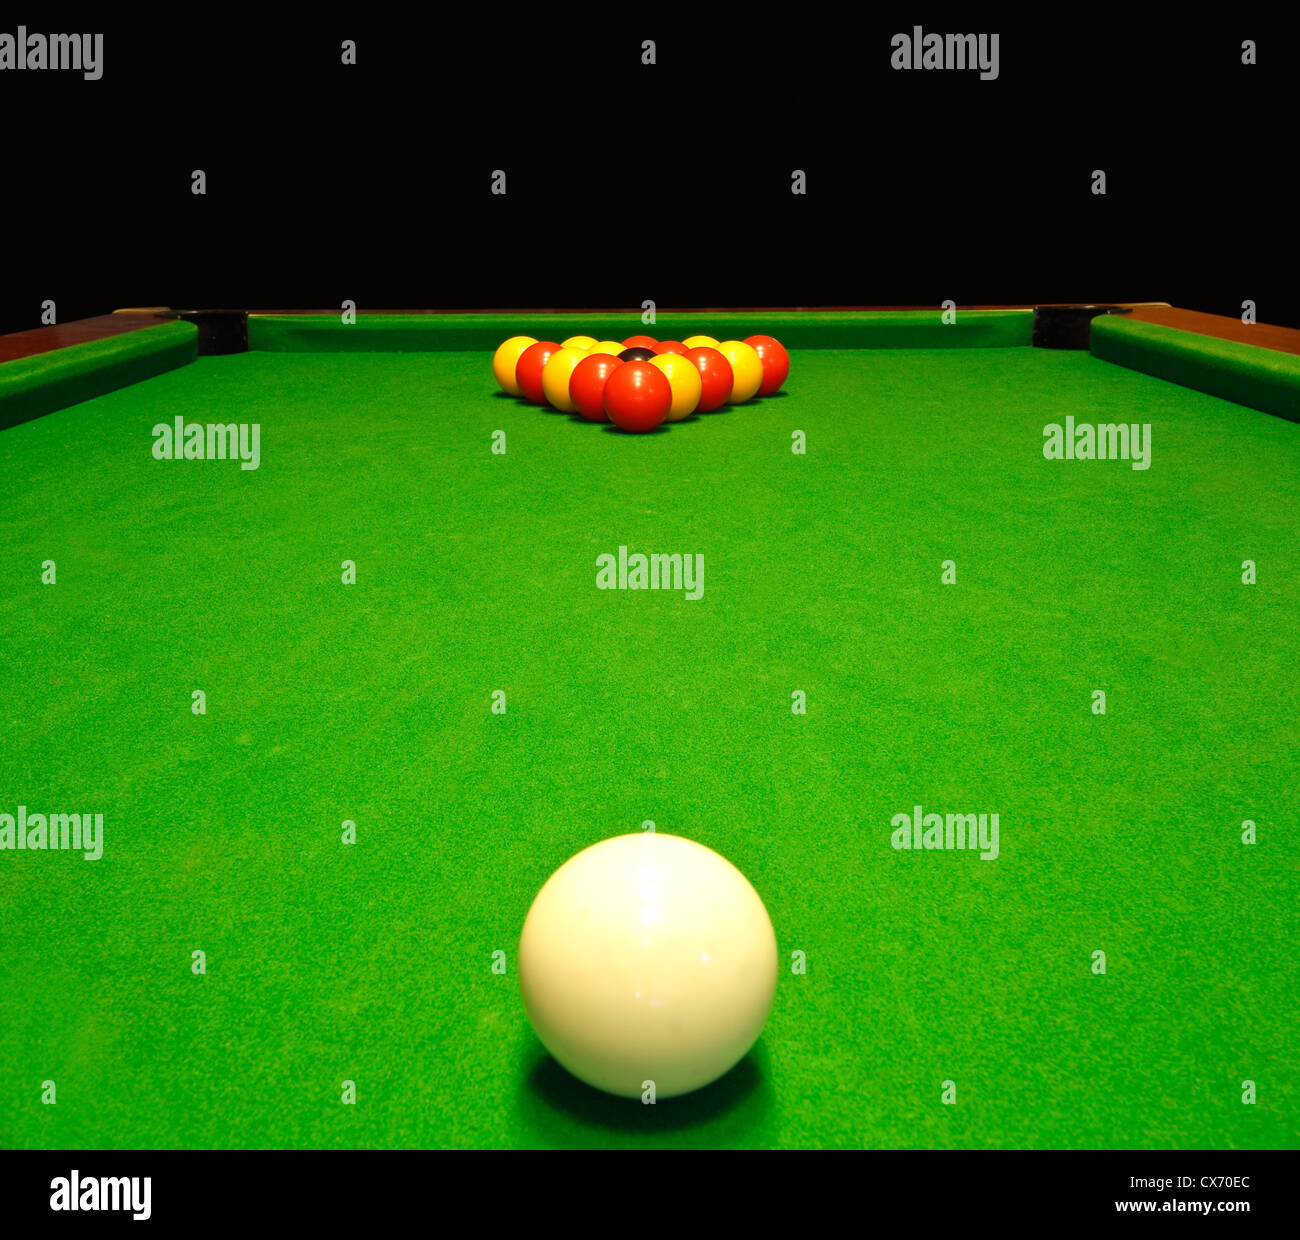 A green cloth billiards or pool table with english league red and yellow  balls Stock Photo - Alamy